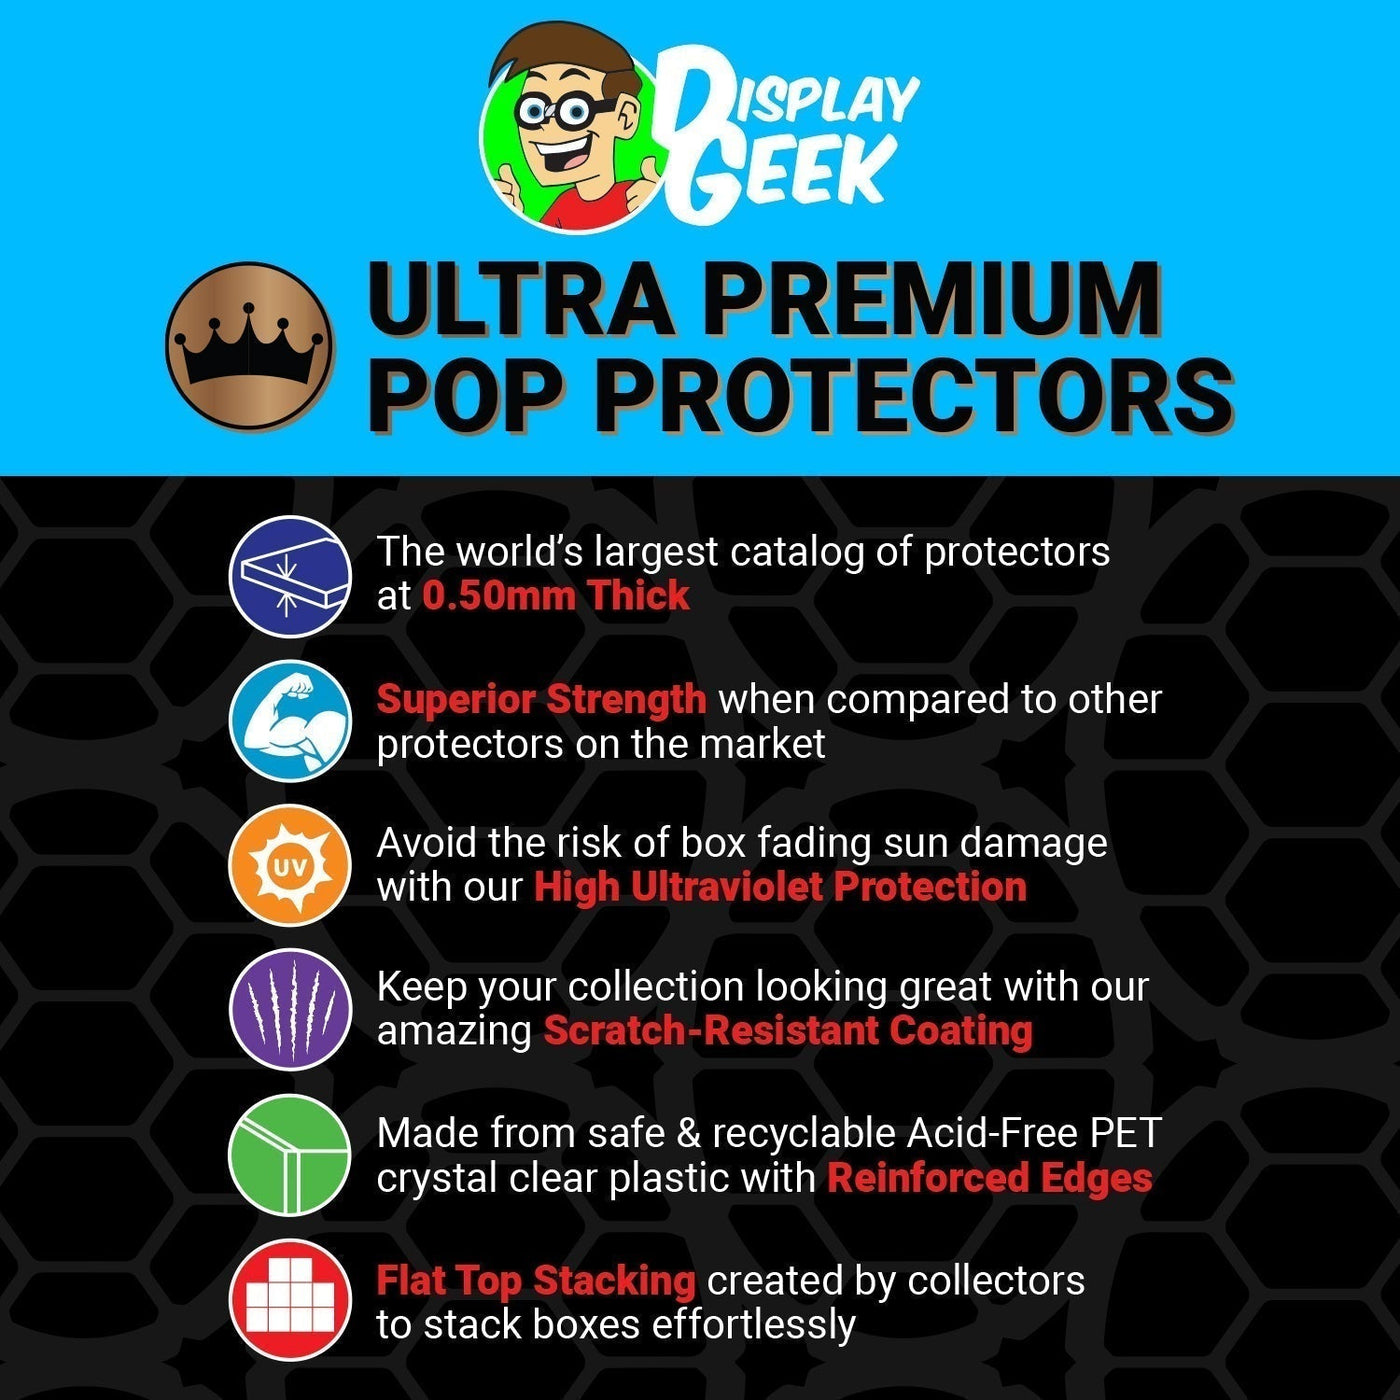 Pop Protector for 2 Pack Jurassic Park Dennis Nedry & Dilophosaurus Funko Pop on The Protector Guide App by Display Geek